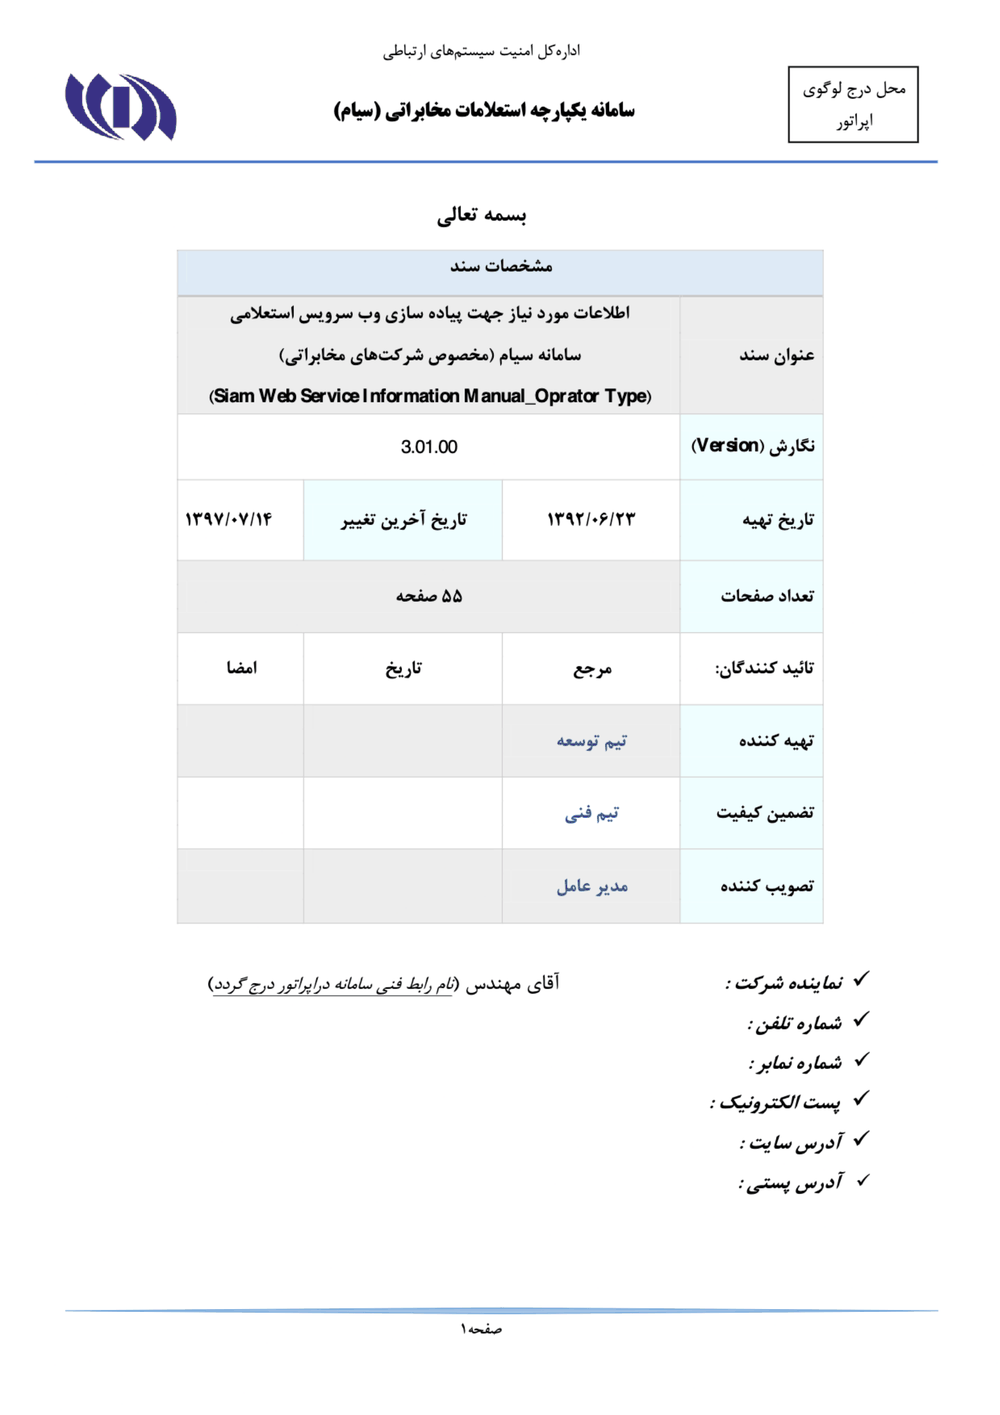 Page 1 from Iran’s SIAM Manual in Persian for Tracking and Controlling Mobile Phones